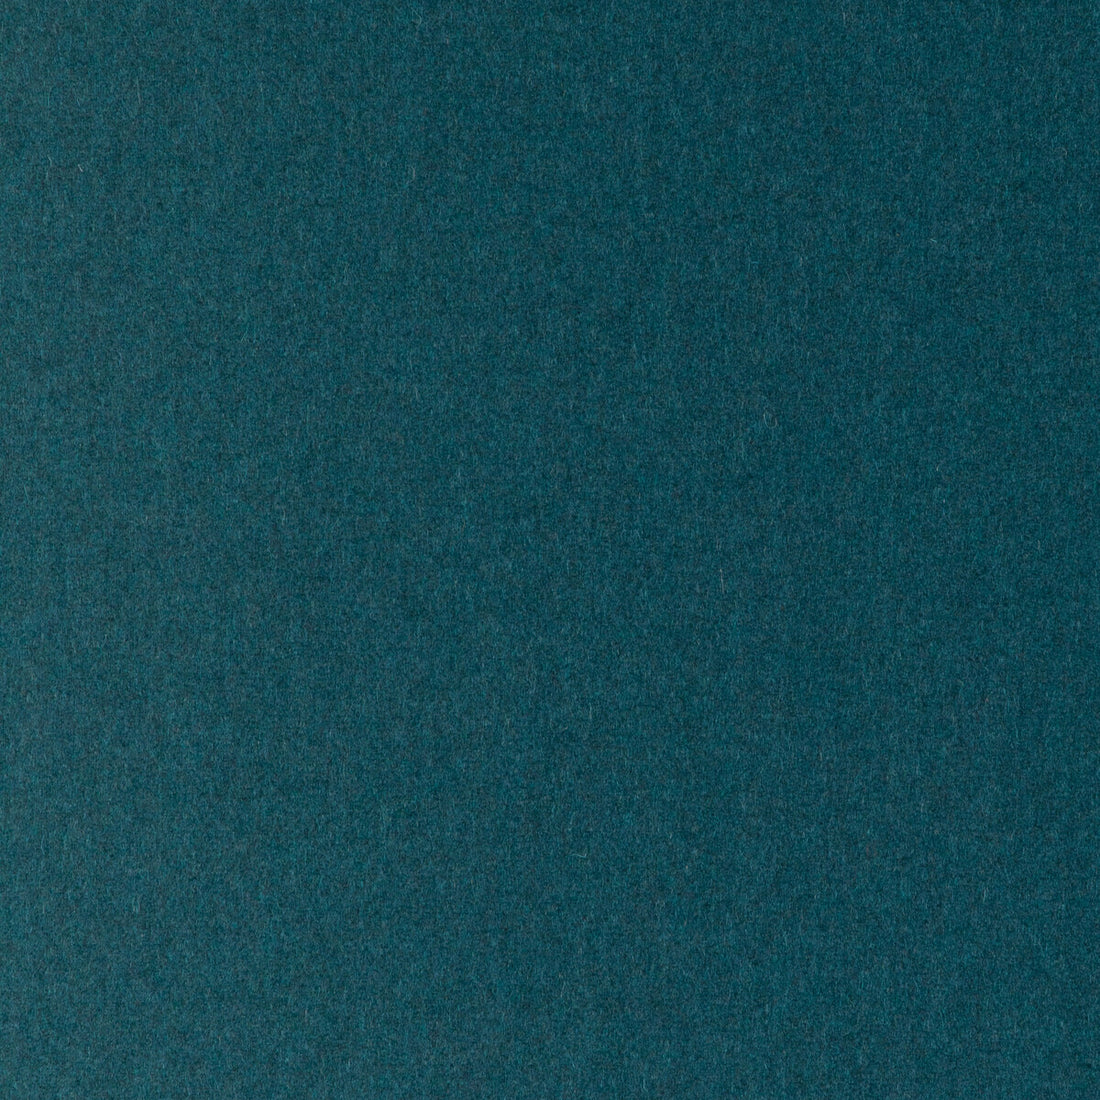 Jefferson Wool fabric in neptune color - pattern 34397.1311.0 - by Kravet Contract